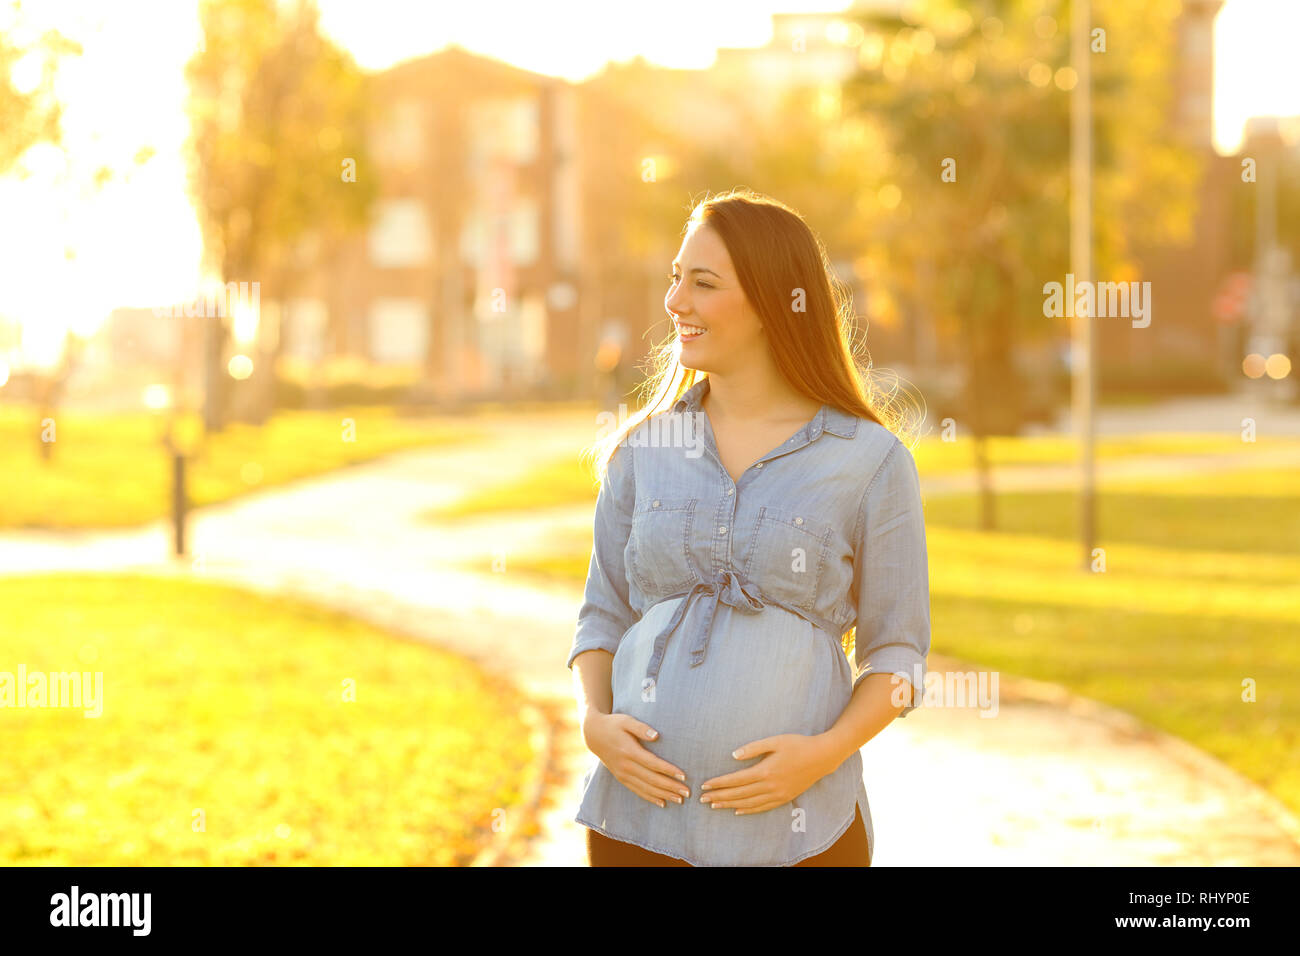 Front view portrait of a happy pregnant woman looking at side walking in a park at sunset Stock Photo